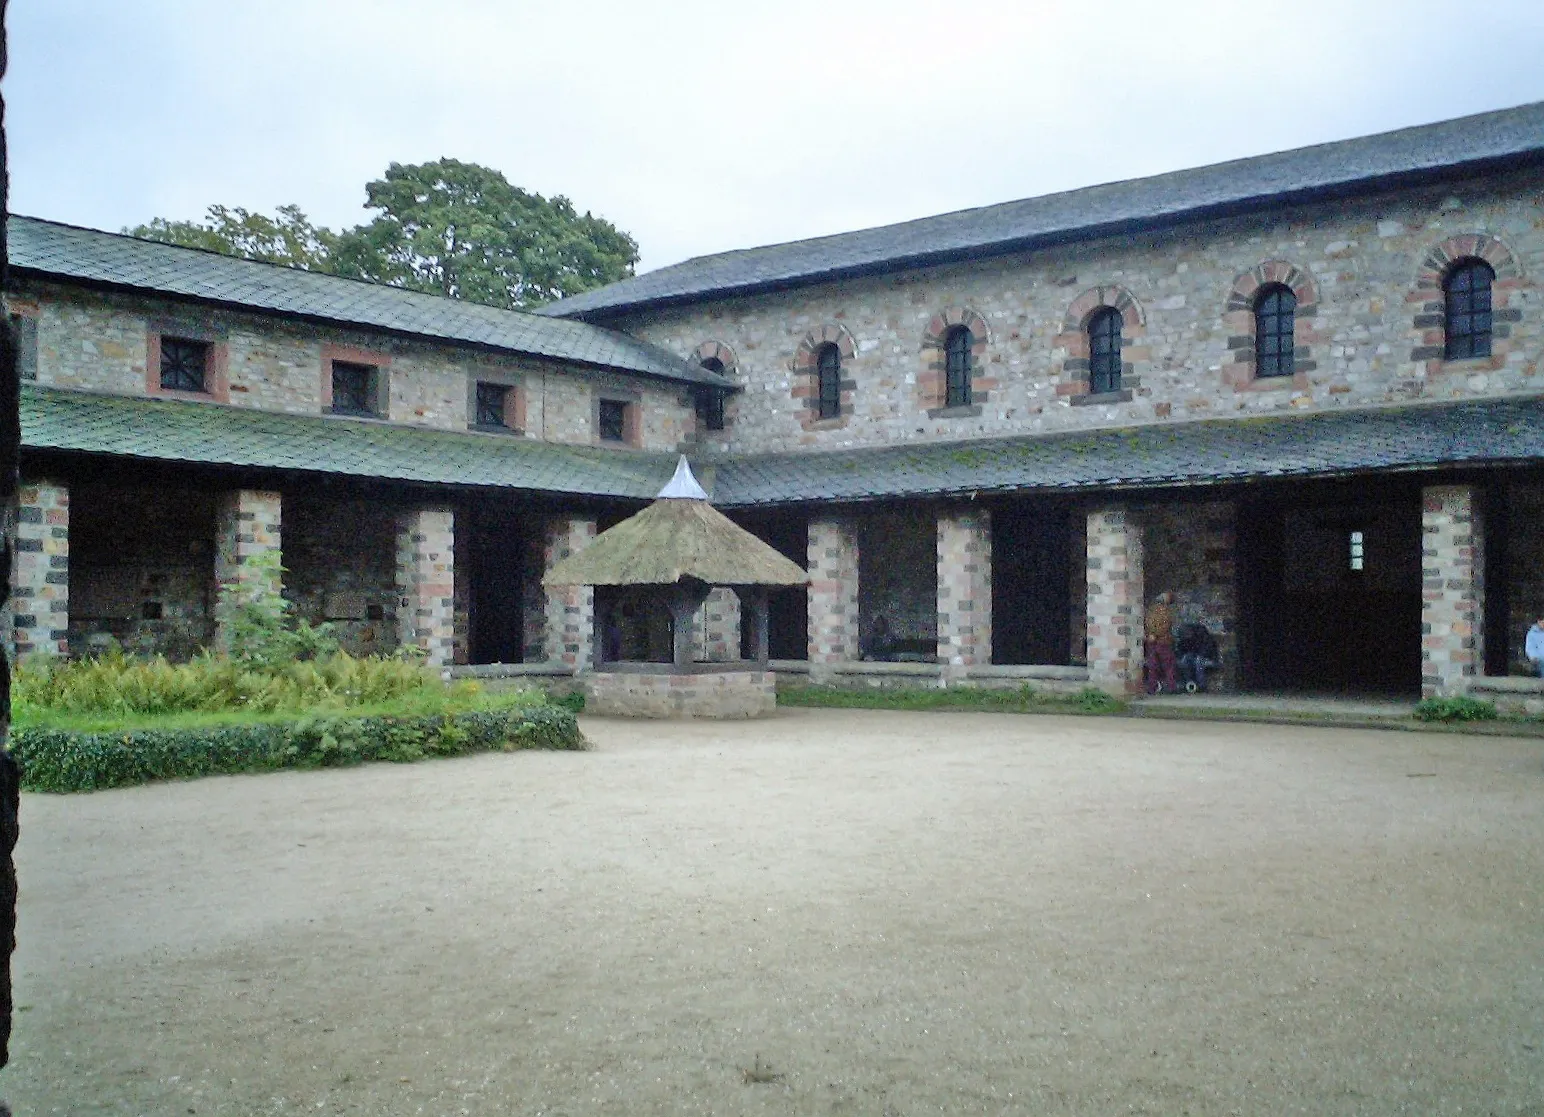 Photo showing: Internal courtyard of the Roman fort (castrum) of en:Saalburg, Germany (Hesse), looking back at the great hall